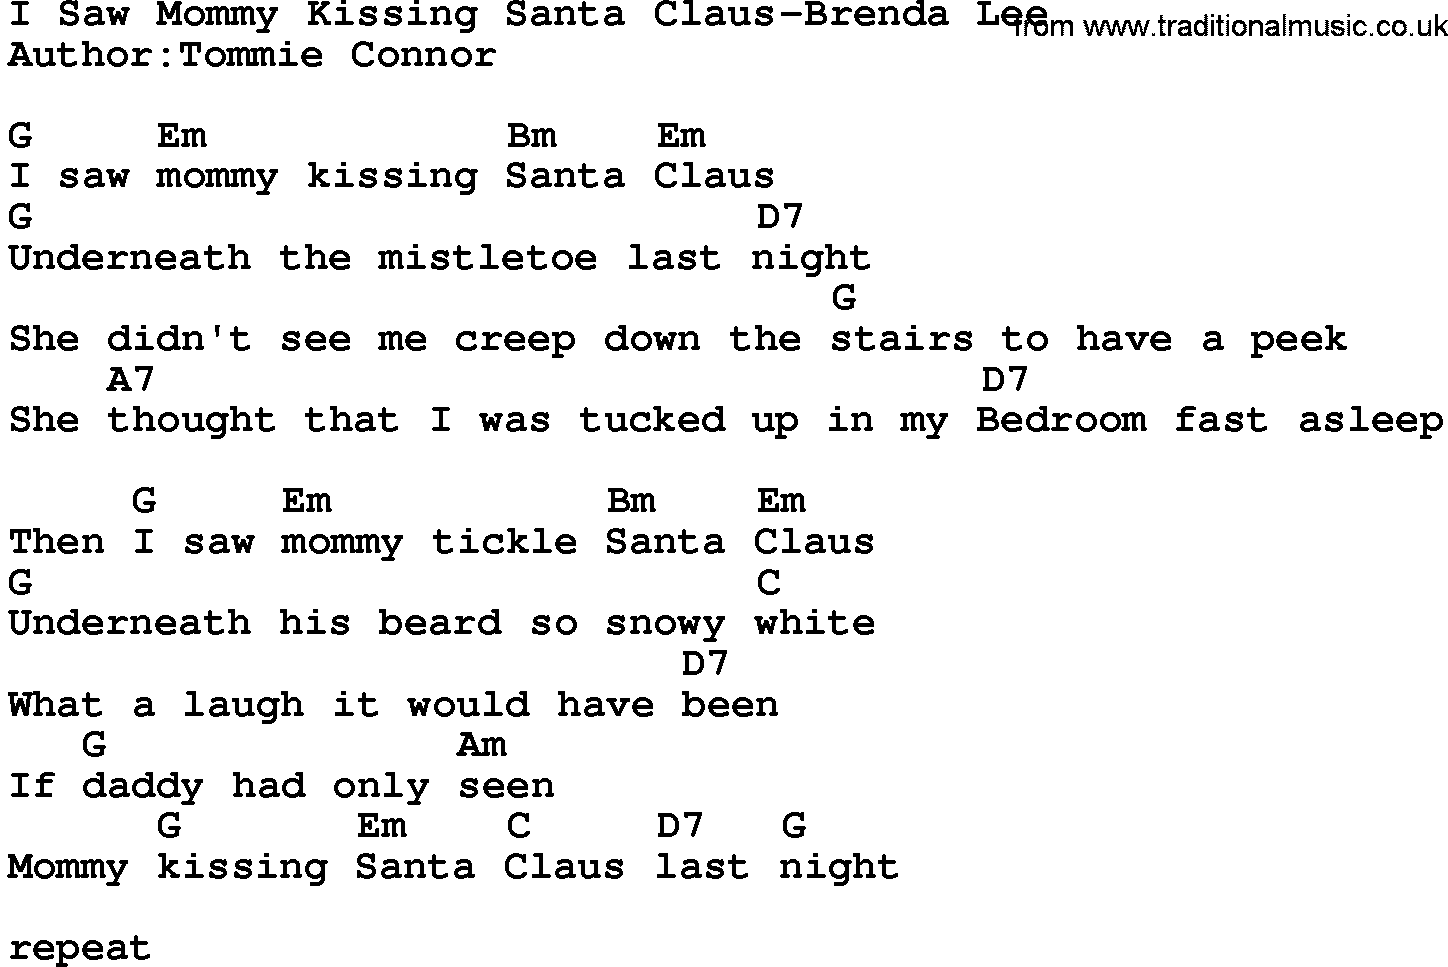 Country music song: I Saw Mommy Kissing Santa Claus-Brenda Lee lyrics and chords